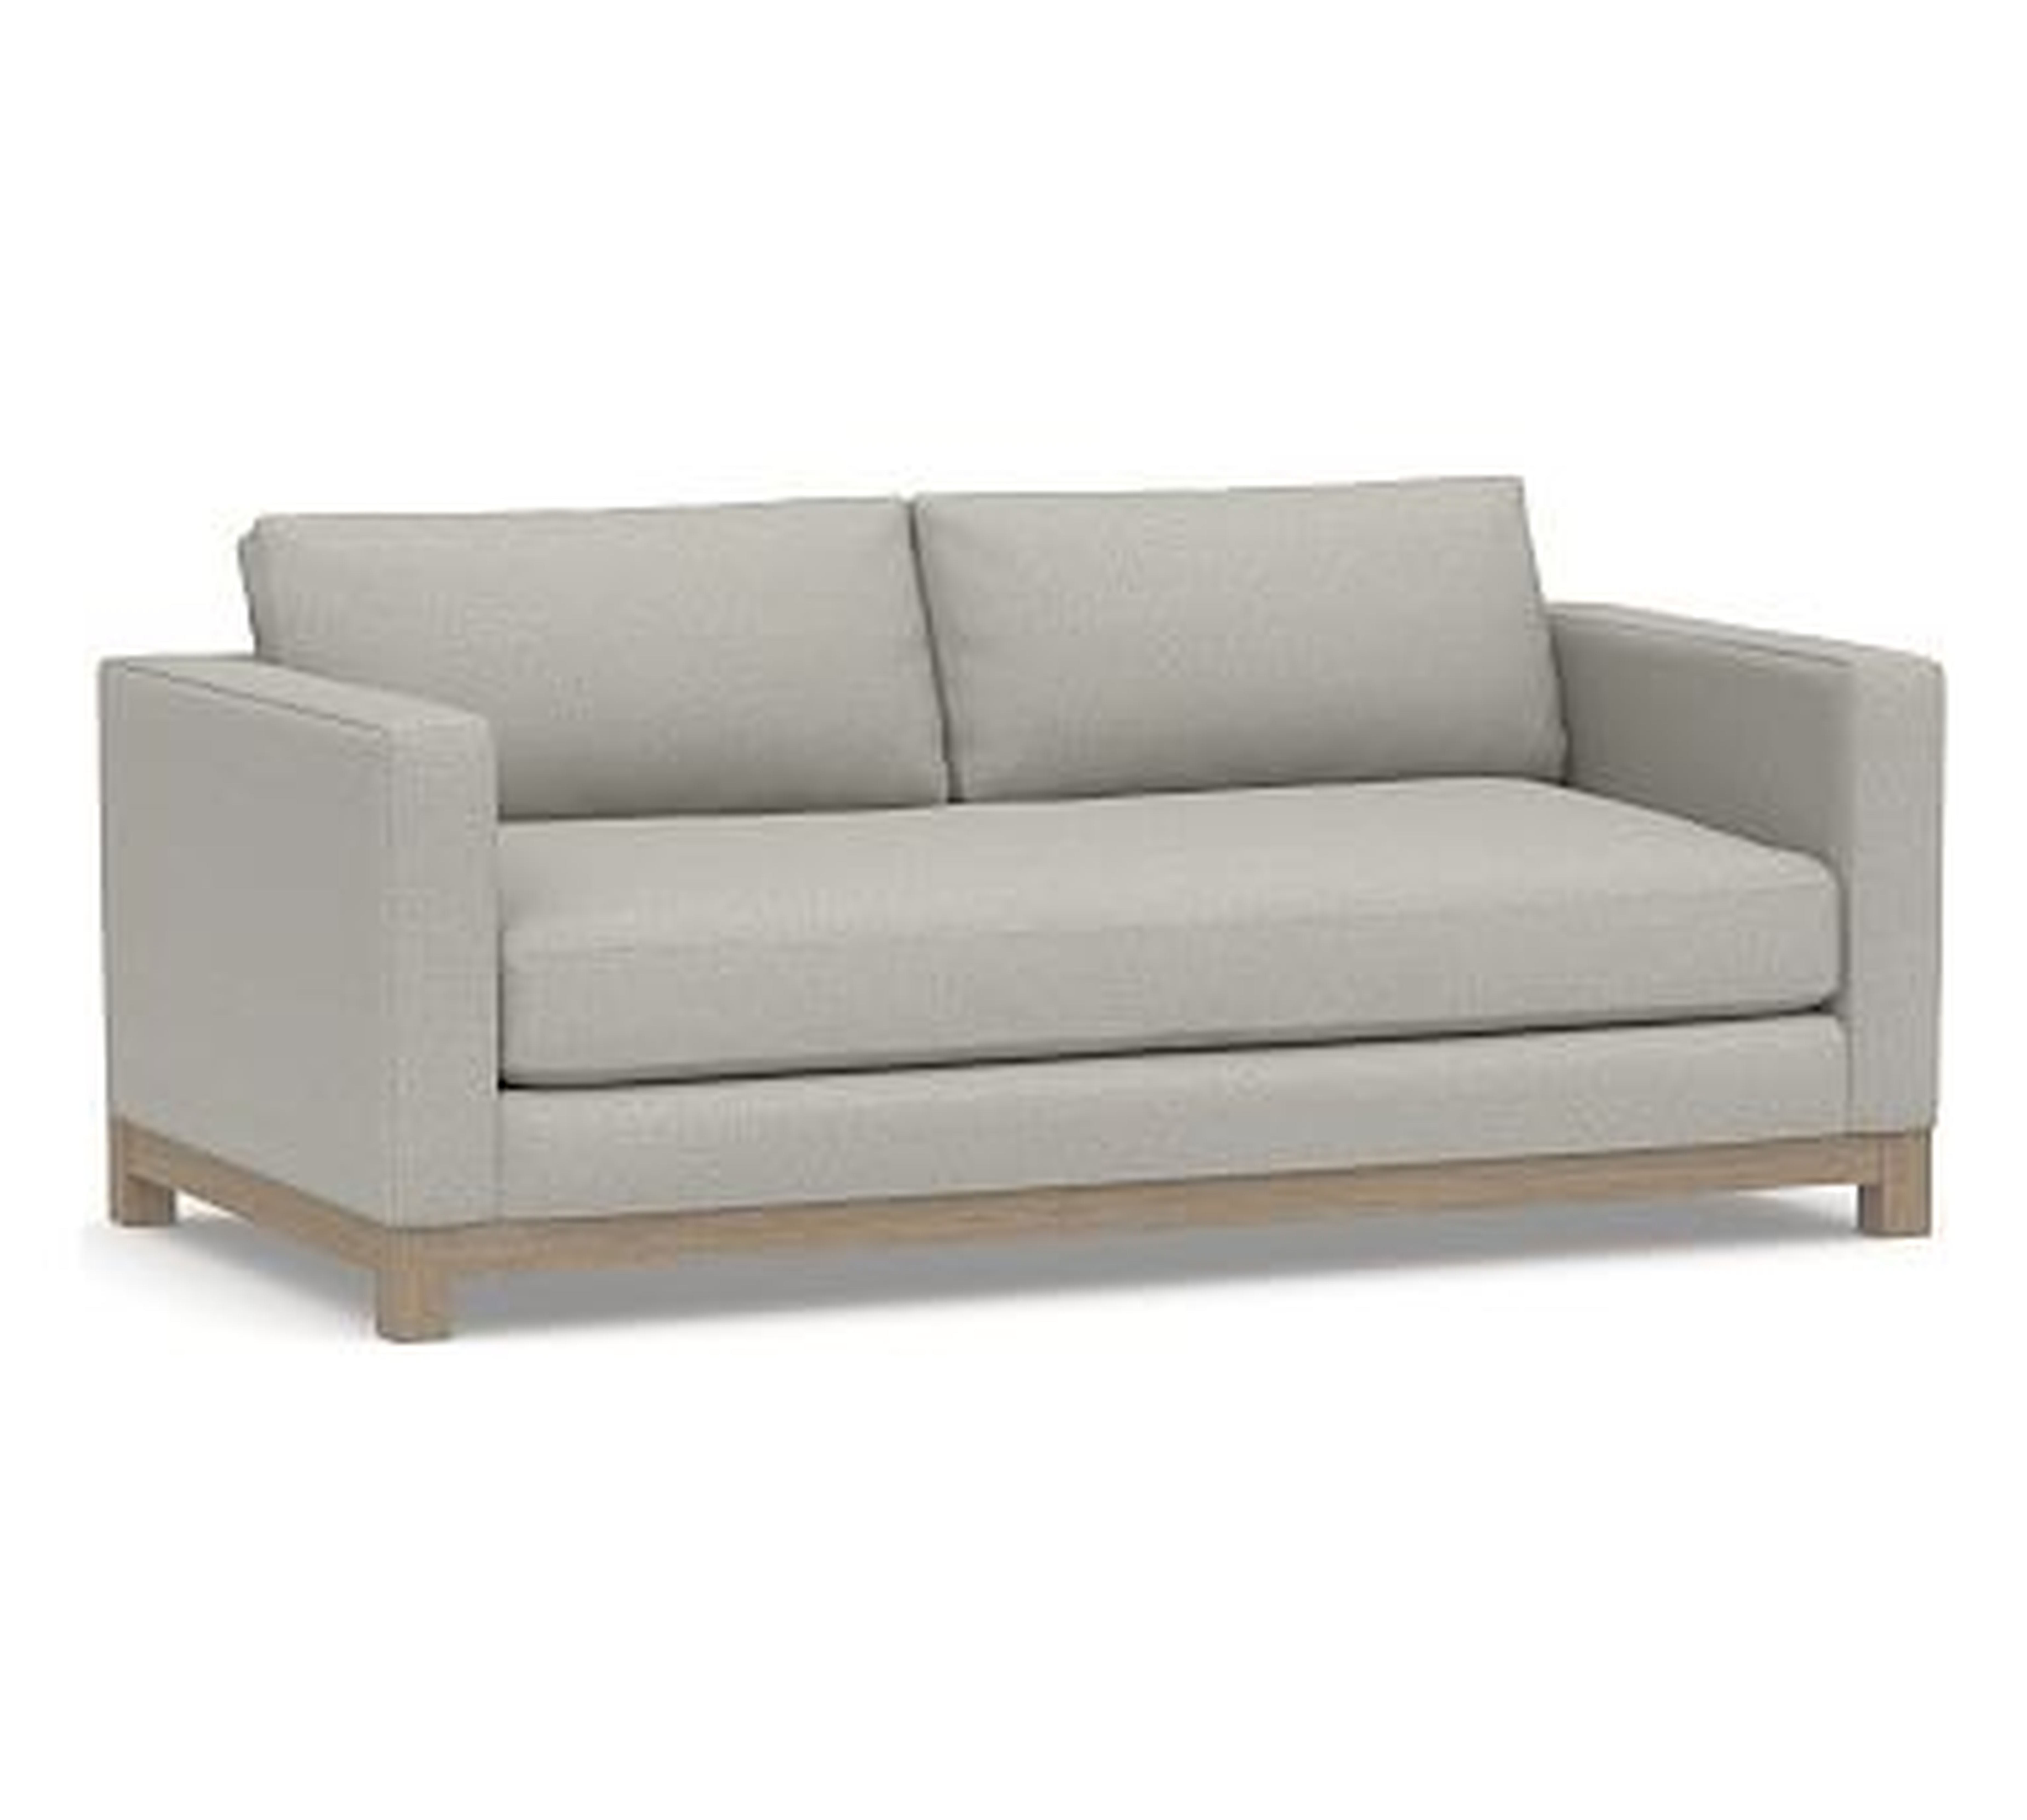 Jake Upholstered Loveseat 70" with Wood Legs, Polyester Wrapped Cushions, Performance Boucle Pebble - Pottery Barn